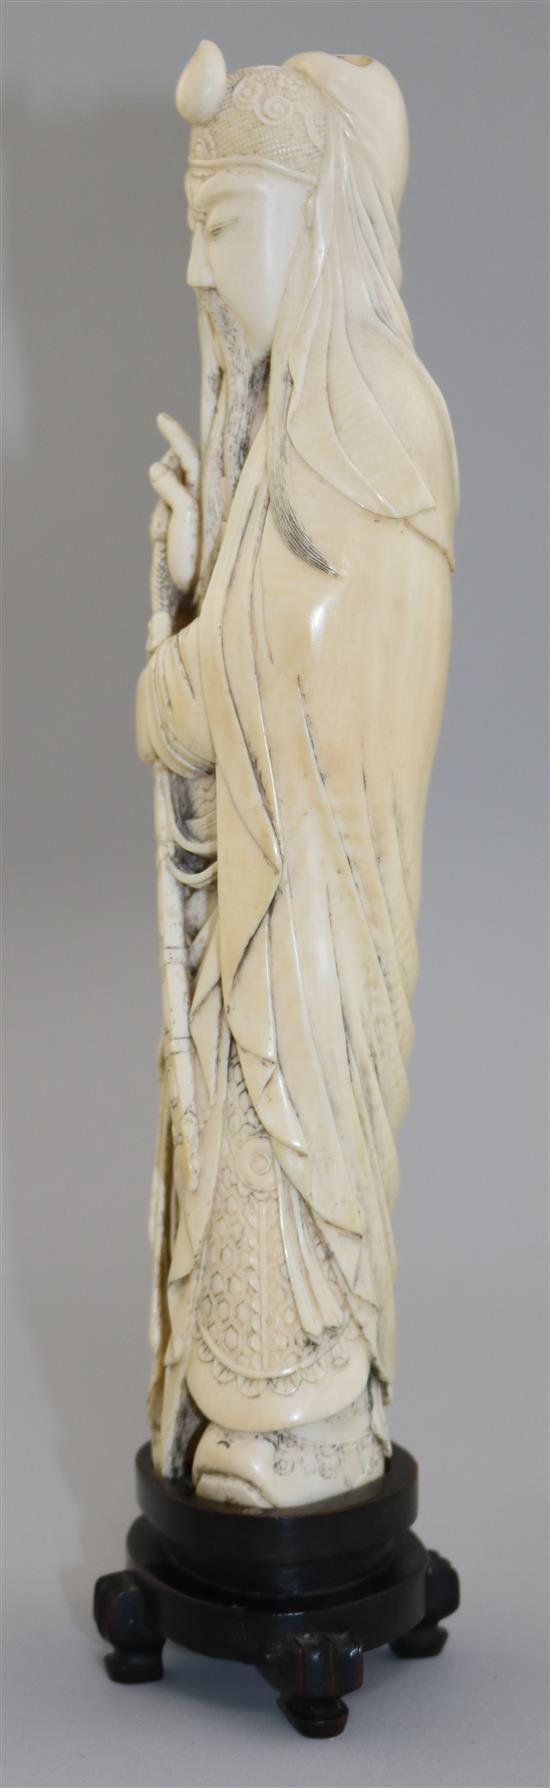 A Chinese ivory tusk figure of Lu Dongbin, late 19th / early 20th century, total height 30.5cm